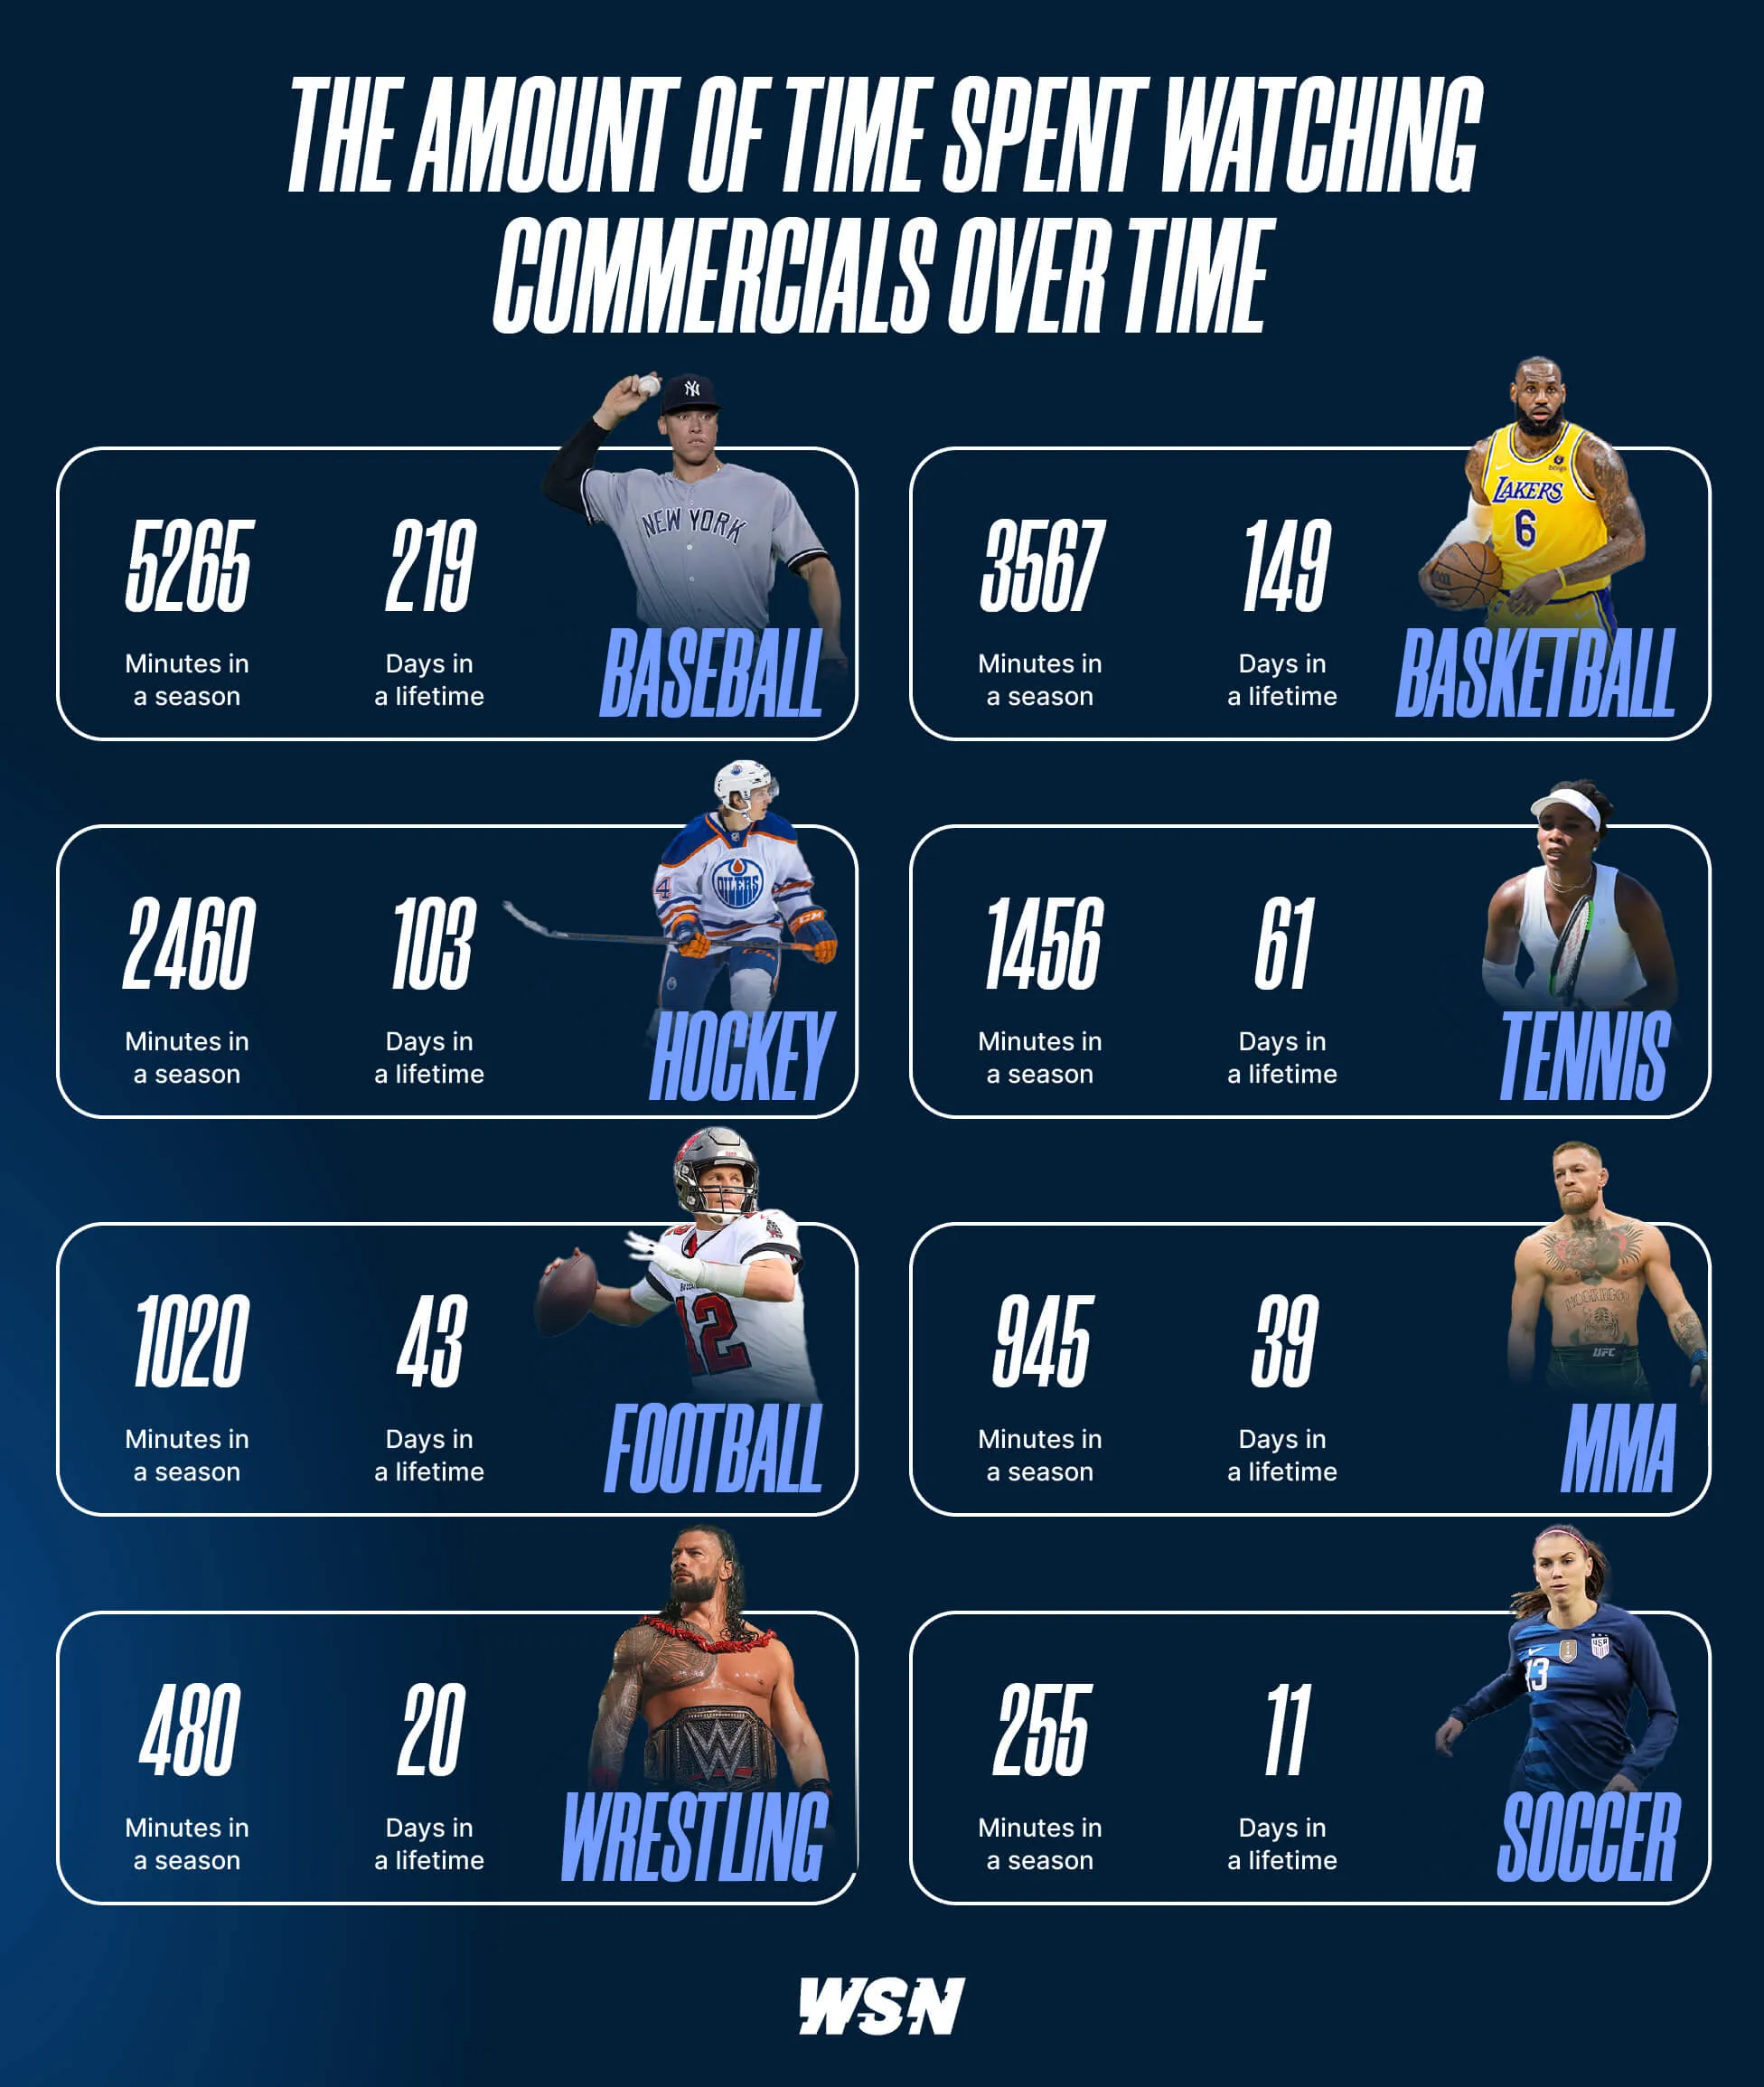 The amount of time sports fans spend watching commercials over time